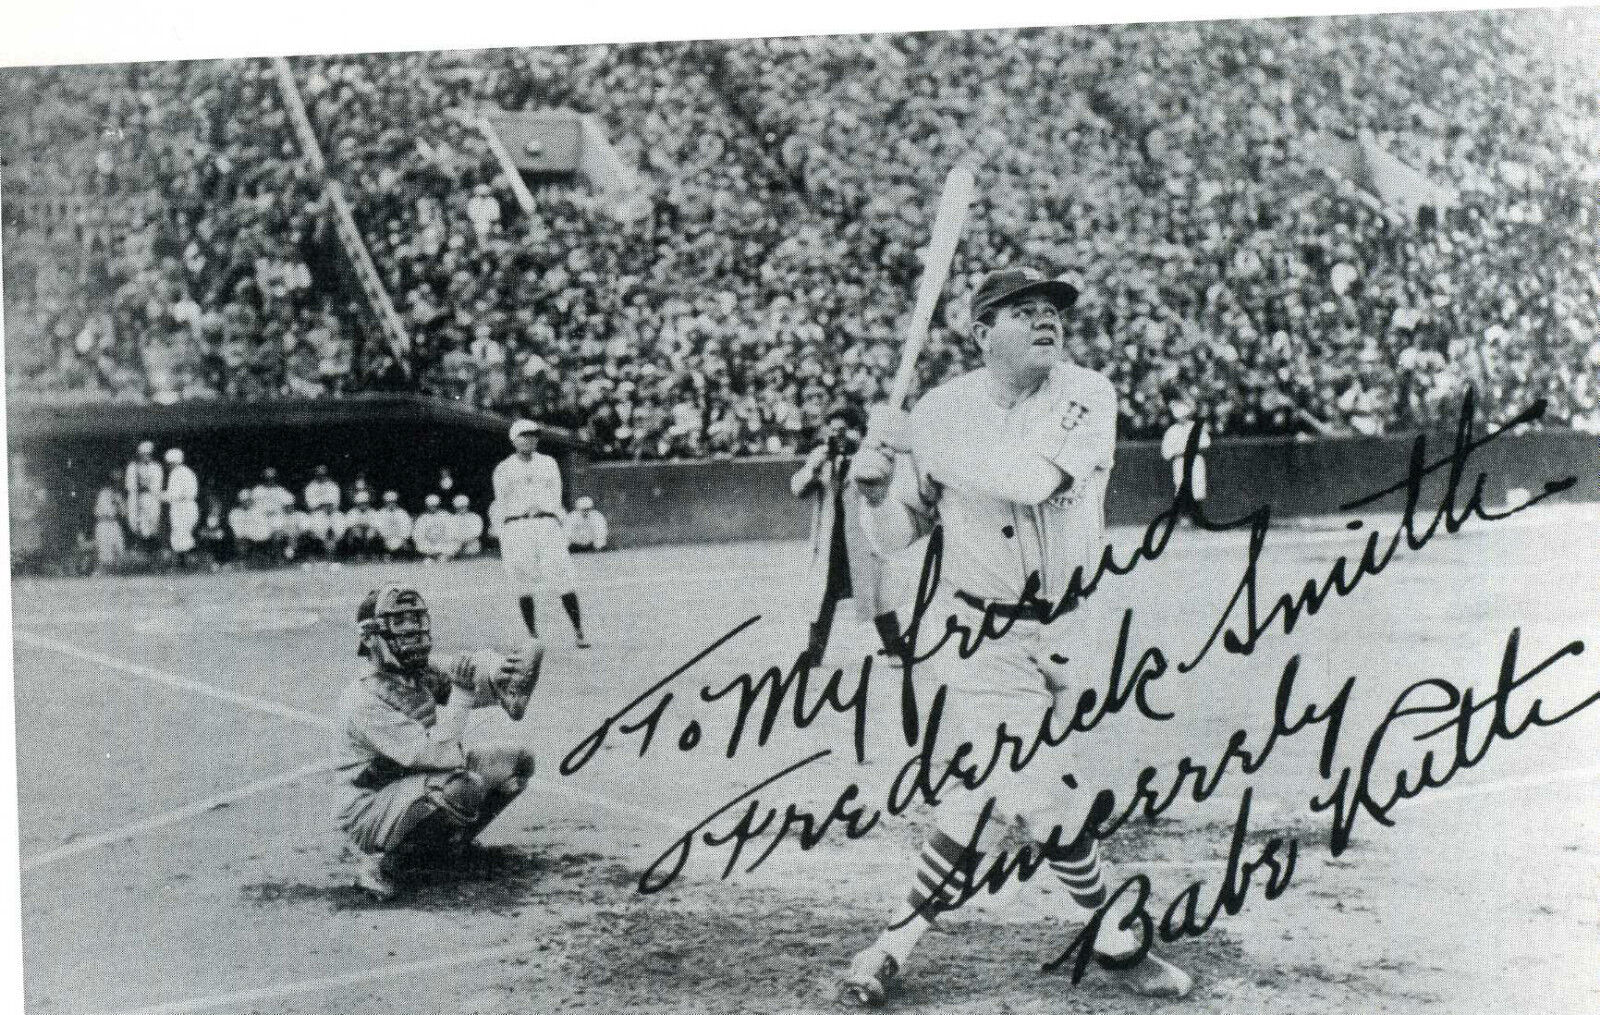 BABE RUTH Autographed Photo Poster paintinggraph - American Baseball Legend - Preprint